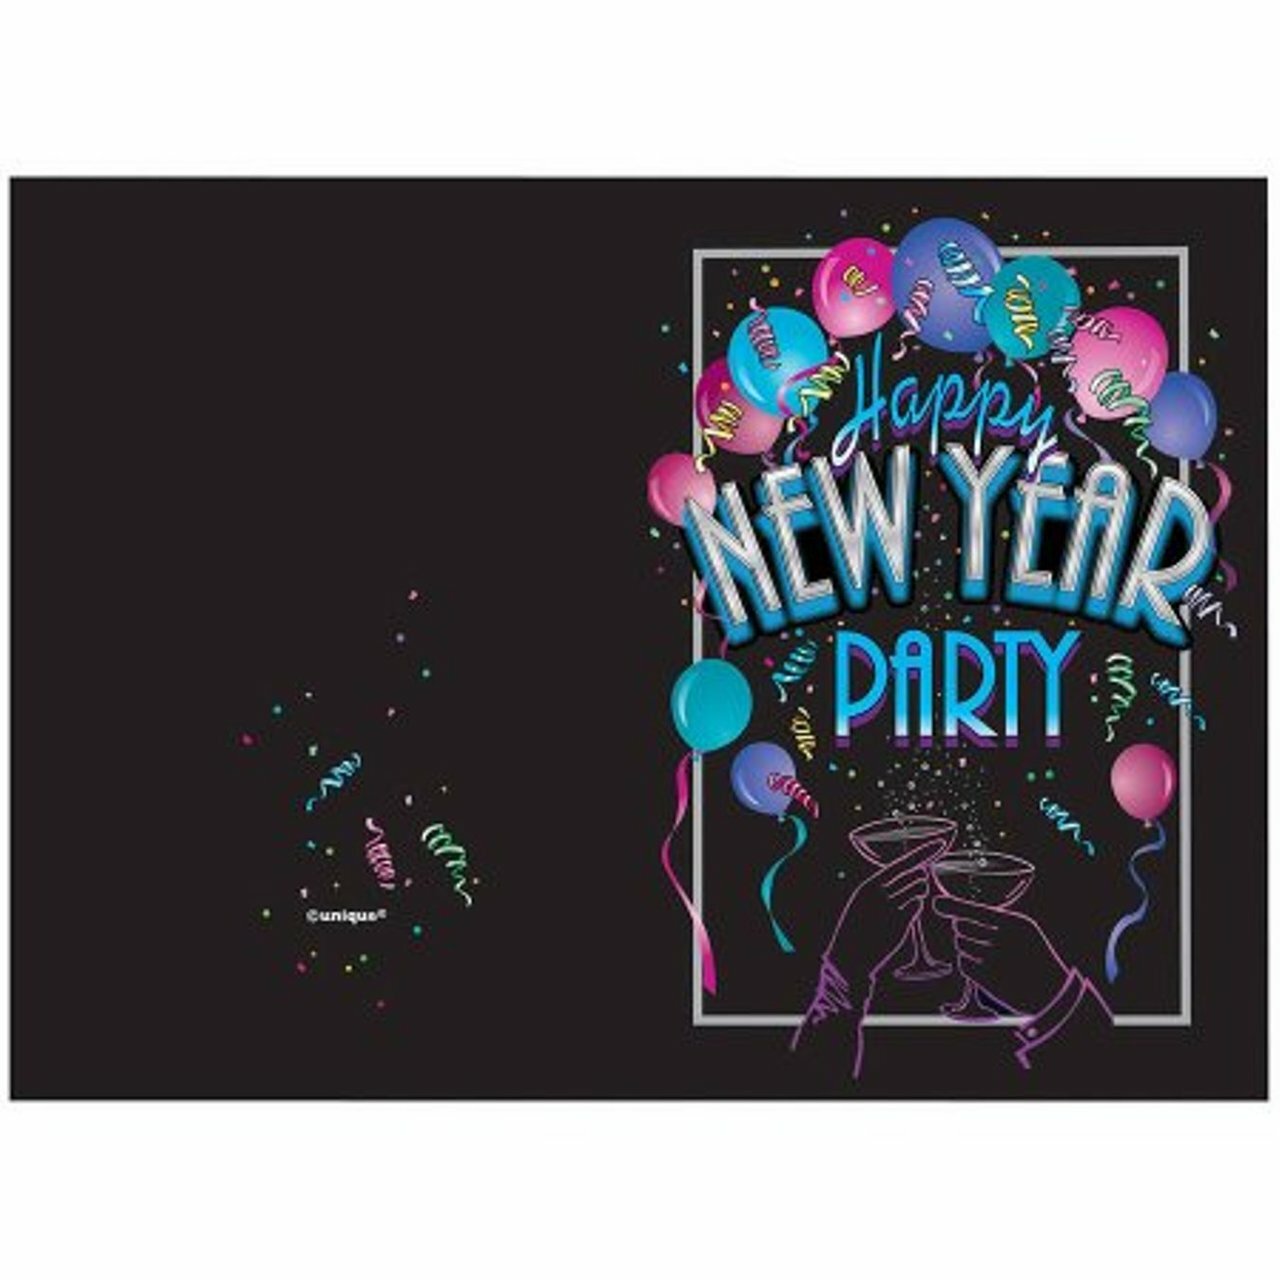 New years party Invitations